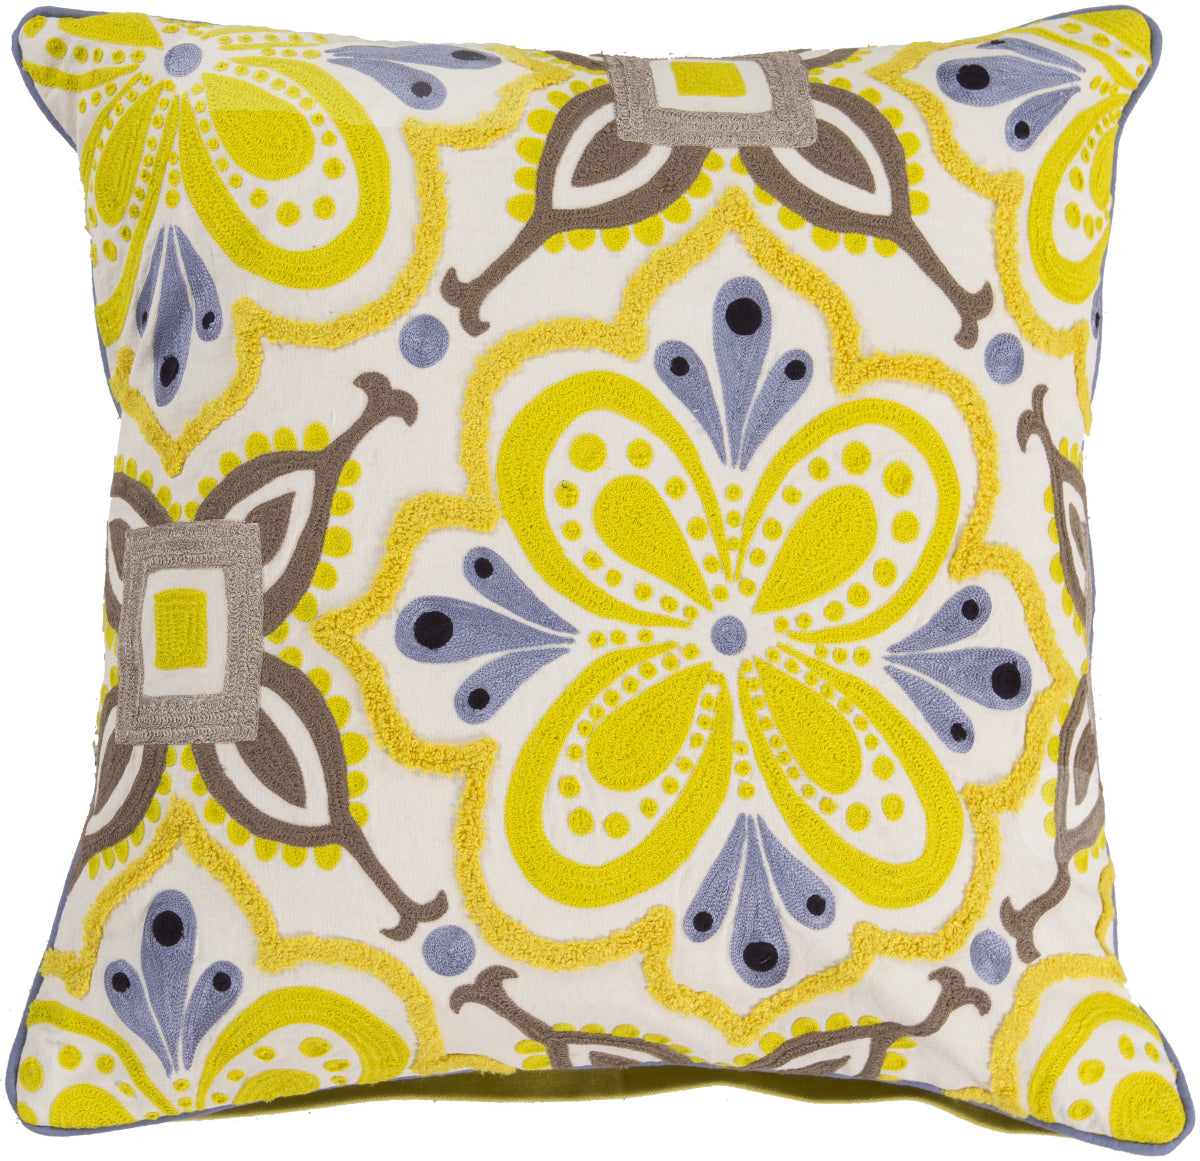 Surya Alhambra Embroidered Modern in Morocco KS-013 Pillow by Kate Spain main image